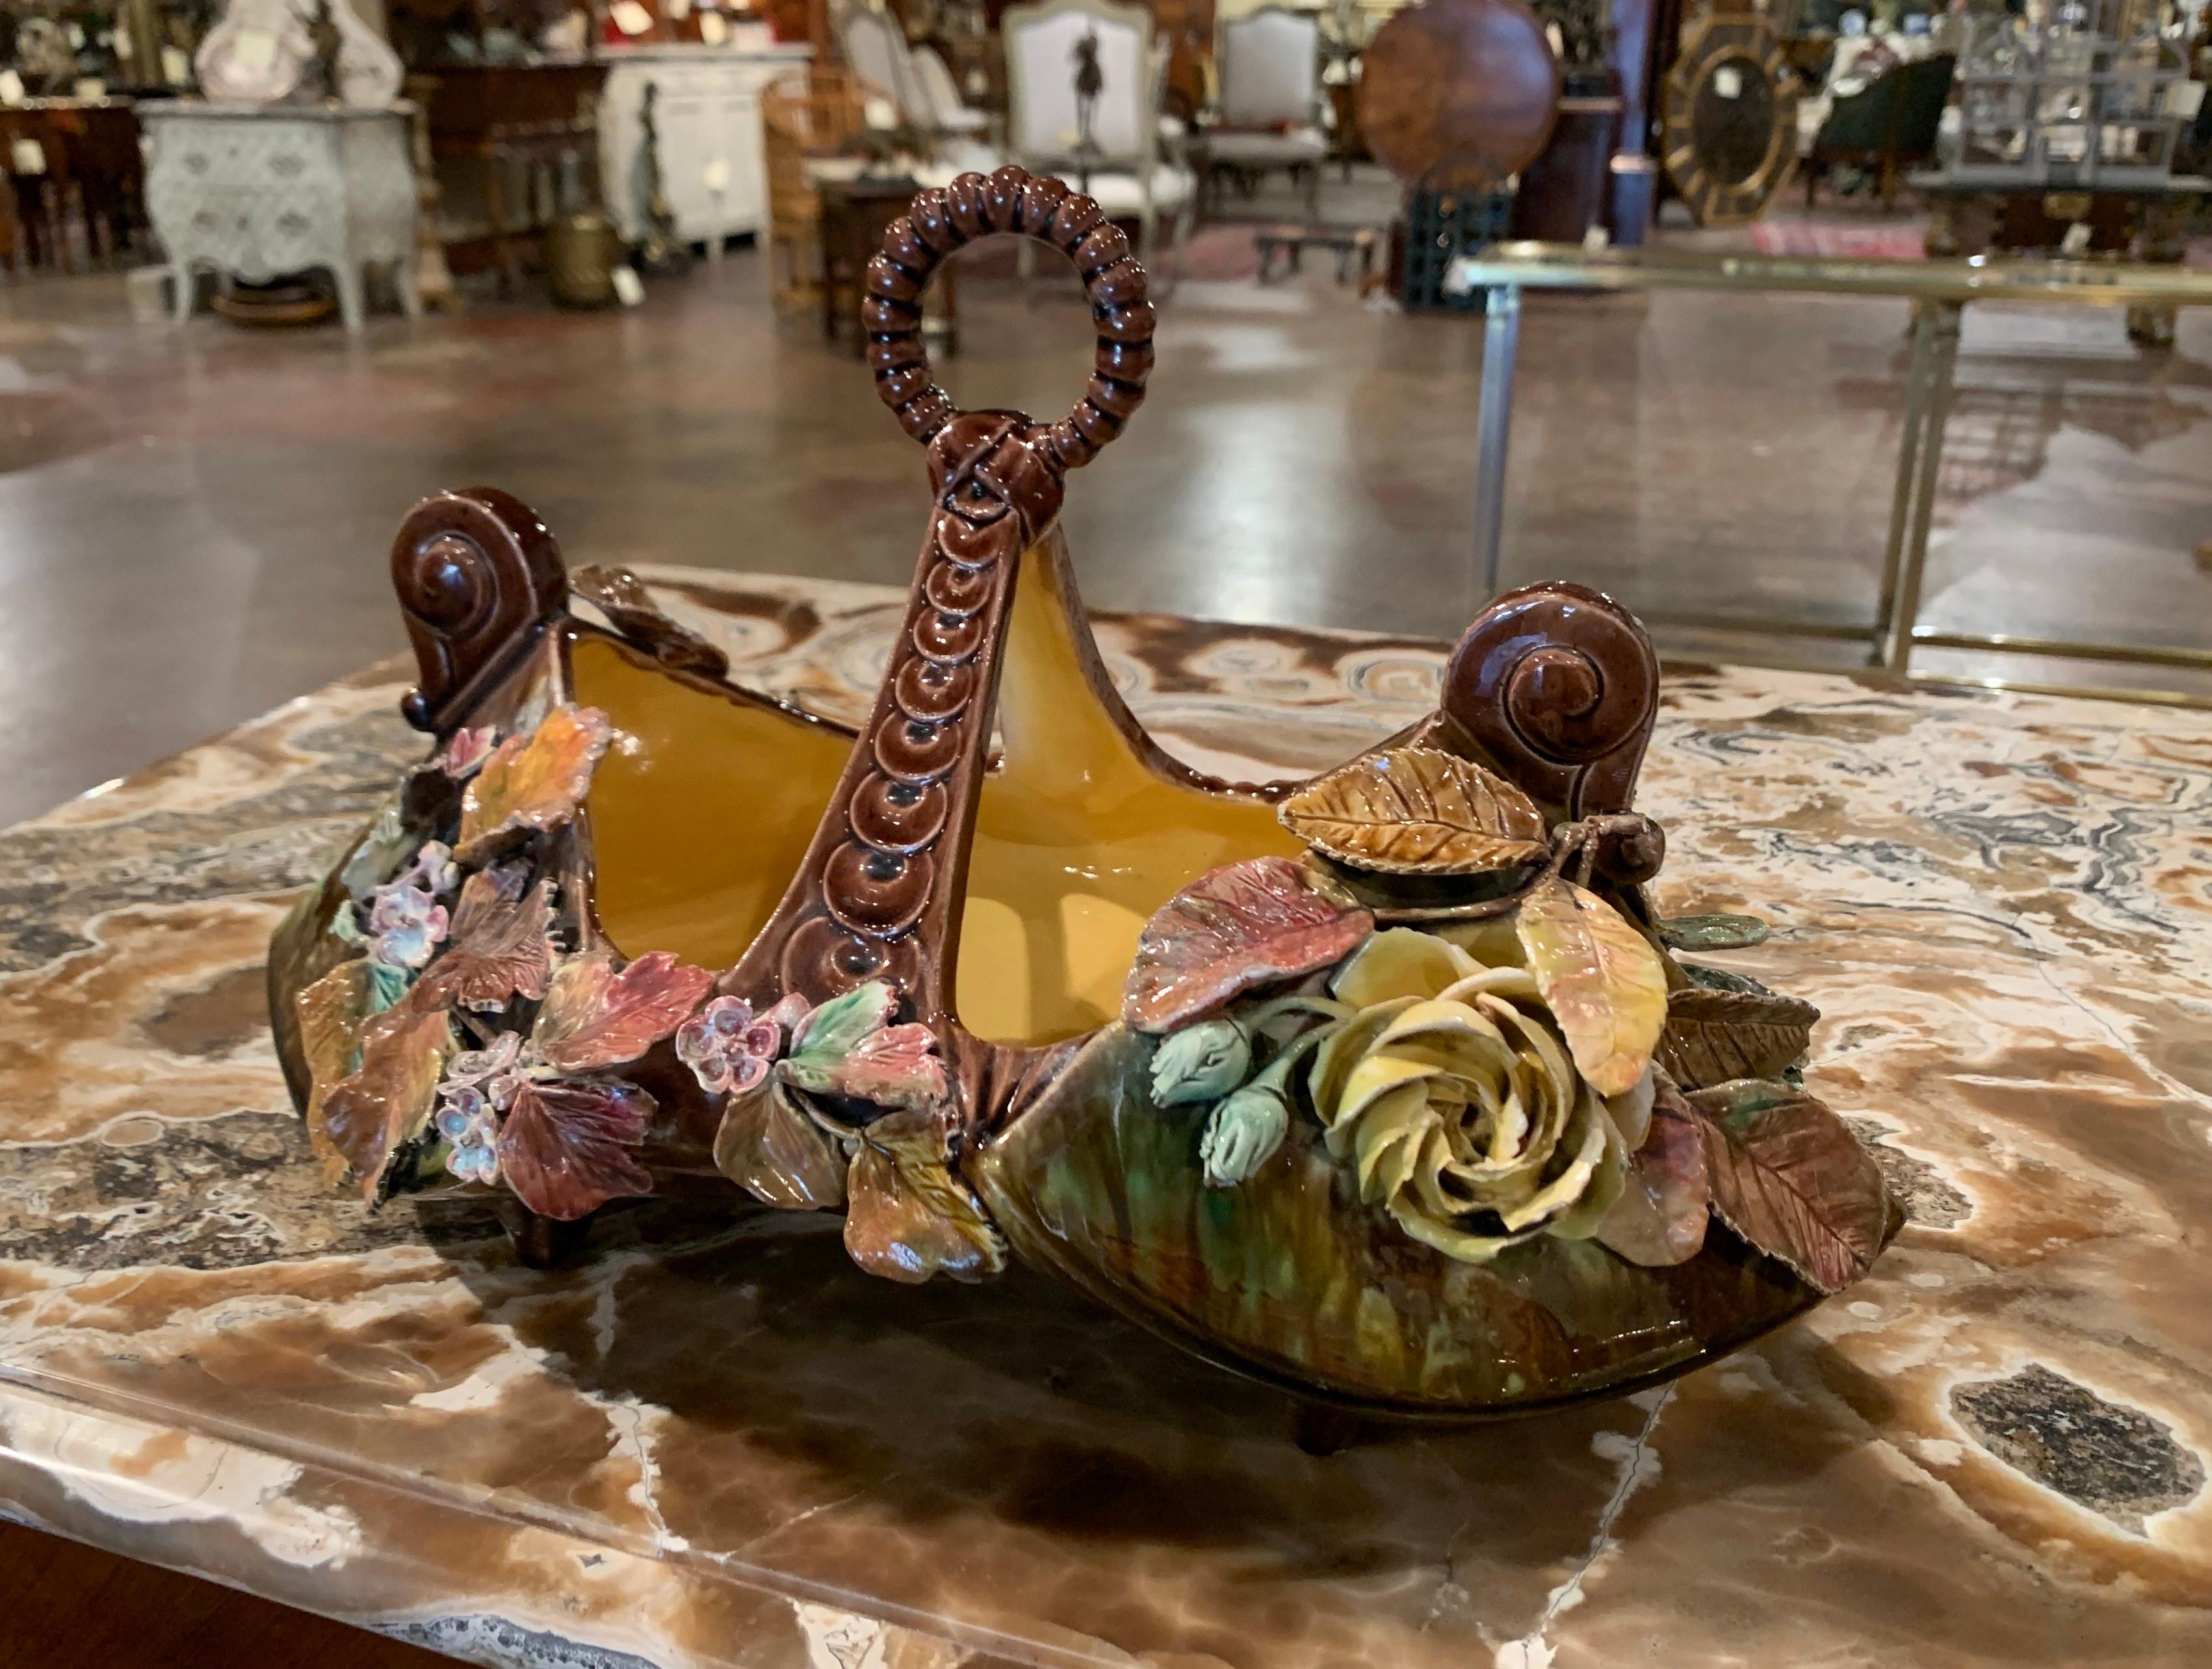 This elegant antique Majolica vase was sculpted in France, circa 1950. This colorful cachepot has a traditional hand painted decor embellished with high relief flowers and leaves in a brown, mauve, beige and pink palette over a dark green